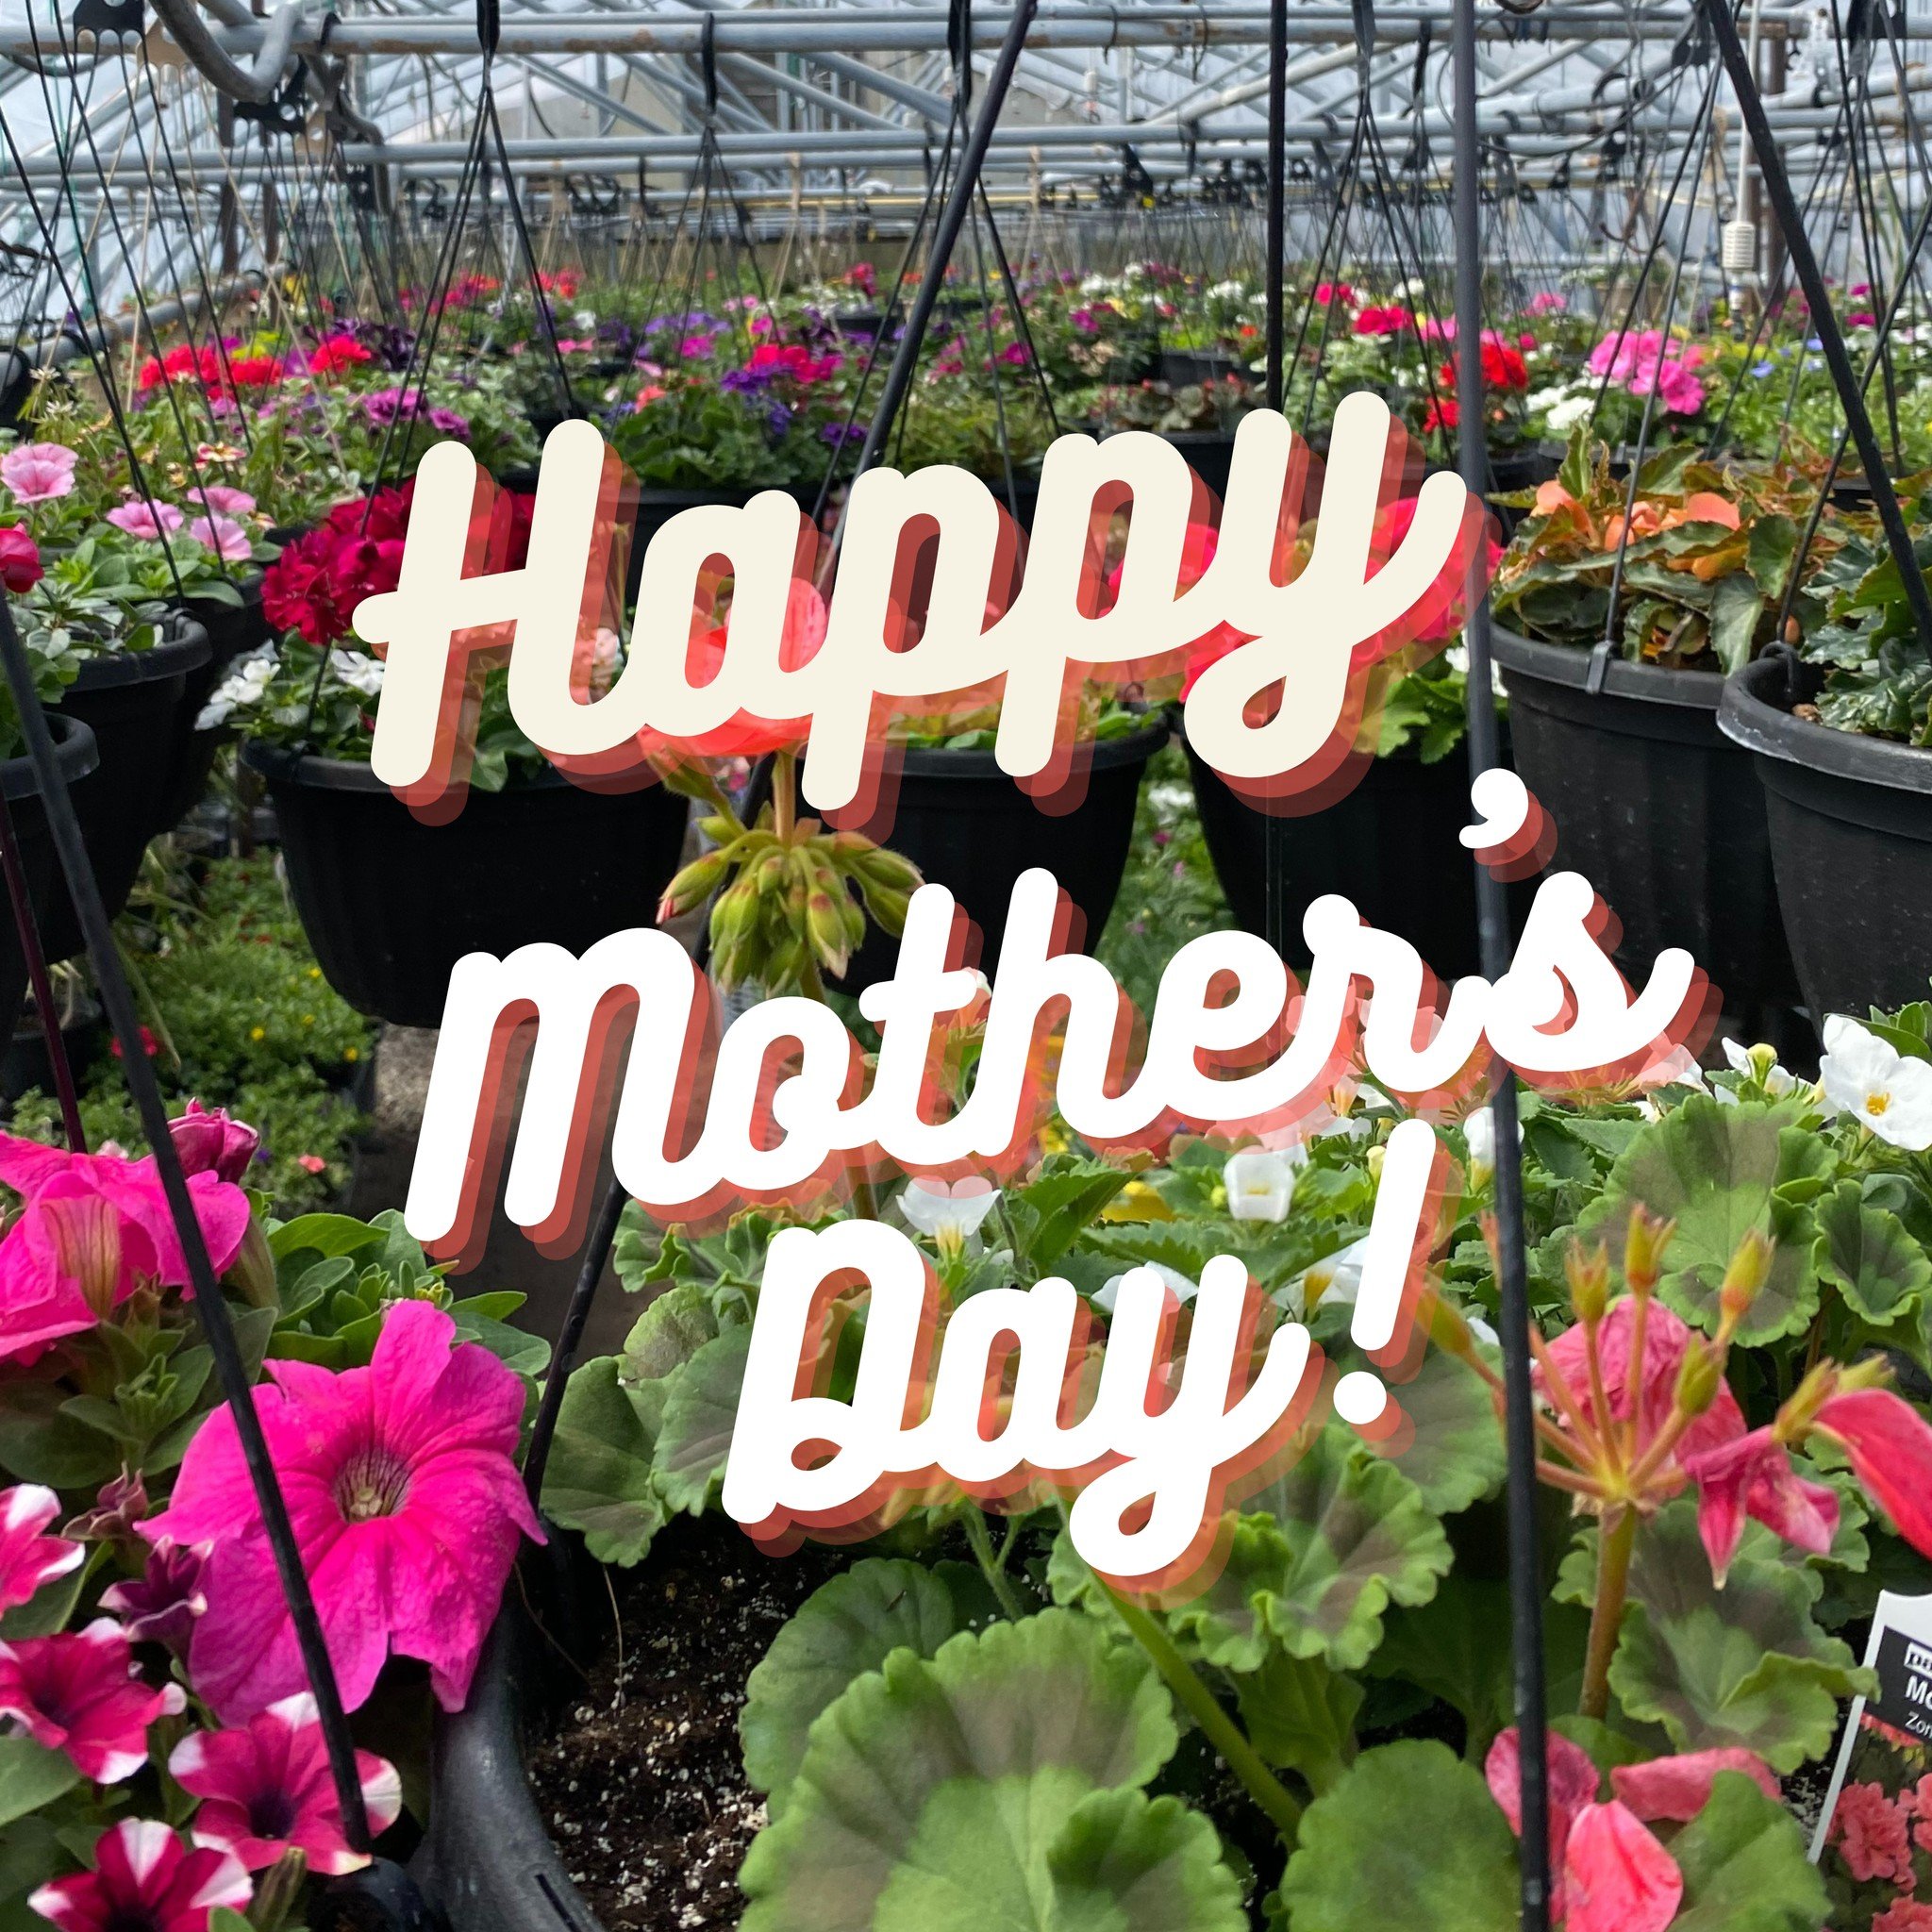 🌷 Celebrating Mom's green thumb this Mother's Day! Find the perfect blooms and gifts at our garden centre to make the day blossom. 💐